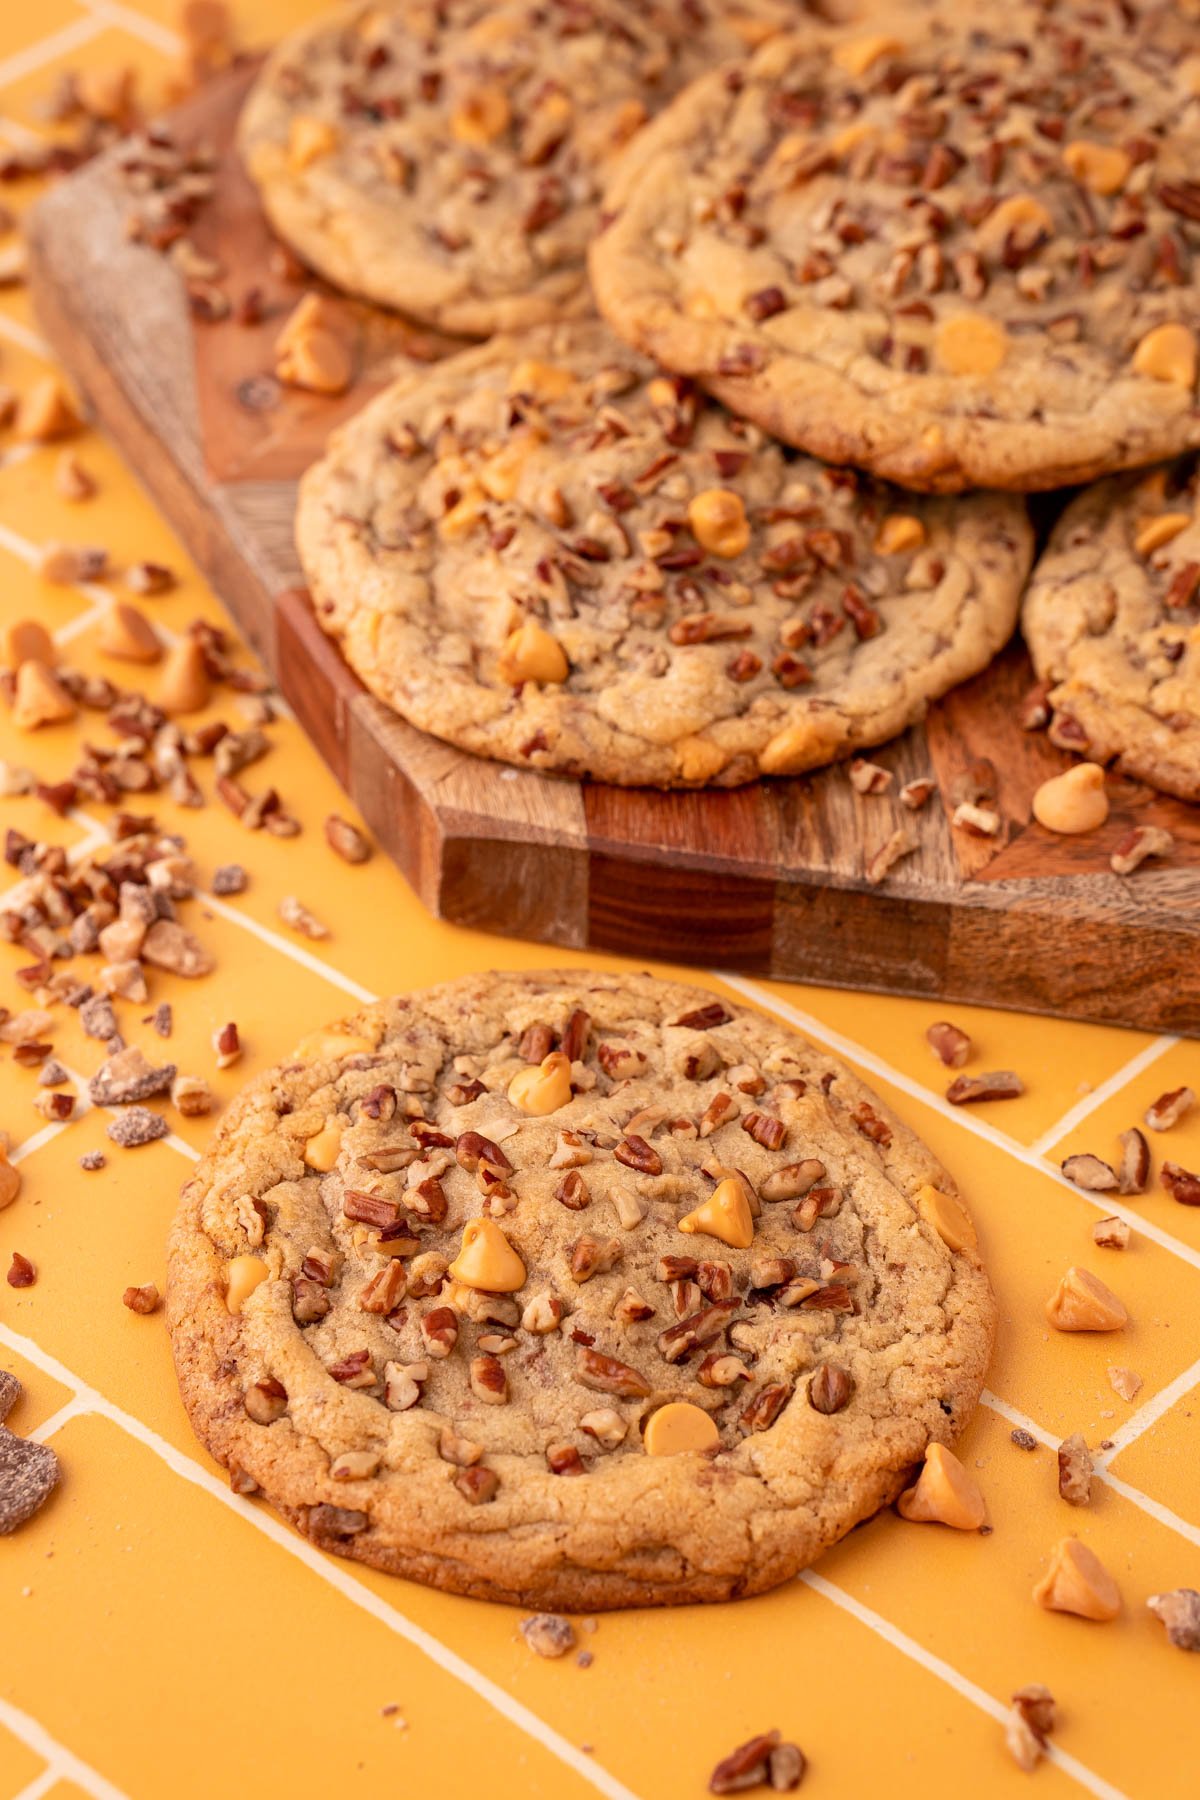 Butter pecan cookies on a yellow table, some on a serving board with pecans and butterscotch chips scattered around it.